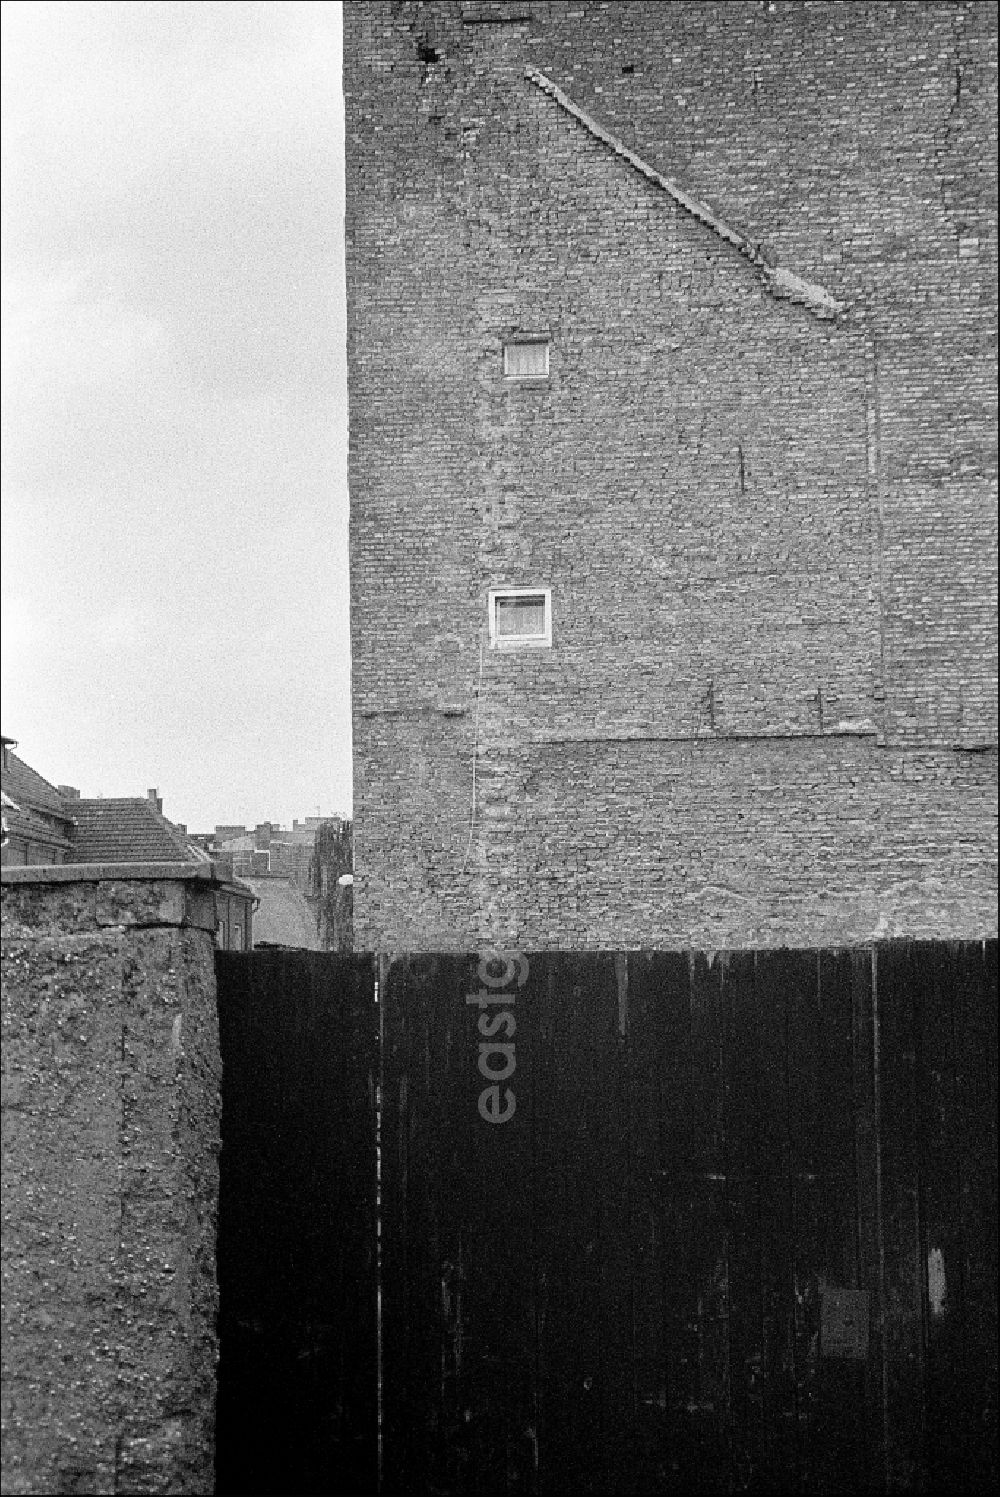 Berlin: Gate to the entrance area of the coal trade on Steinstrasse in the Mitte district of Berlin East Berlin in the territory of the former GDR, German Democratic Republic